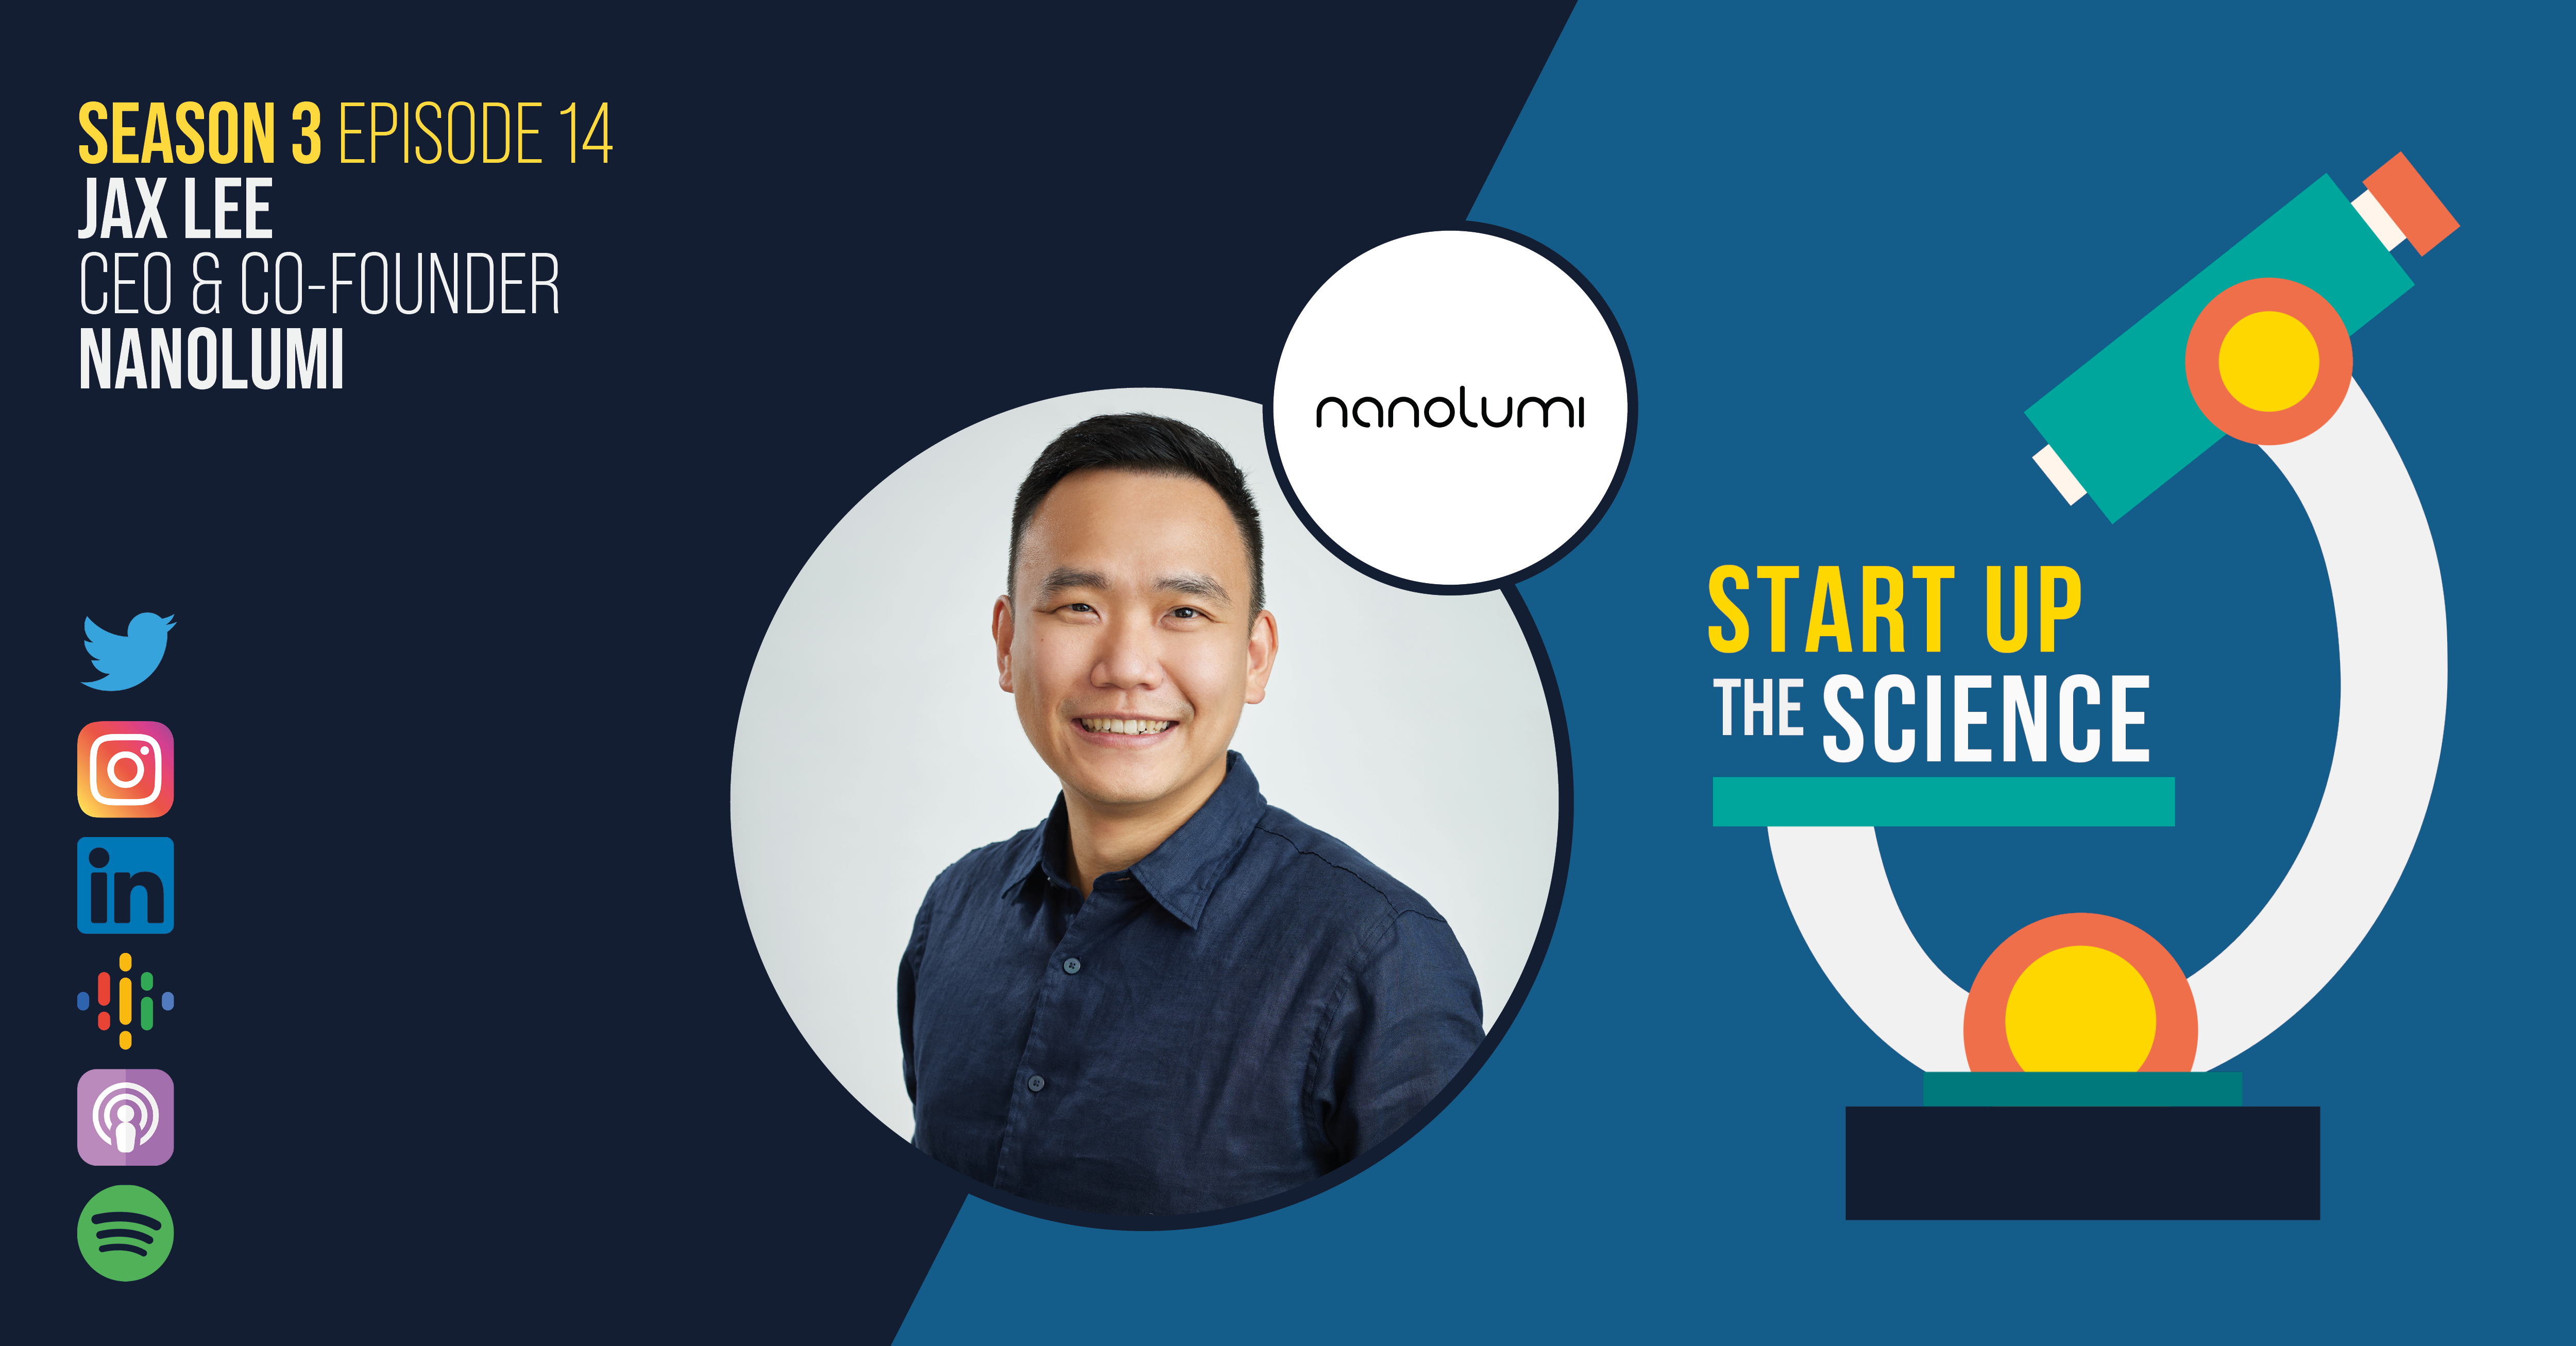 Nanolumi on INAM Start Up The Science Podcast S3E14 Episode